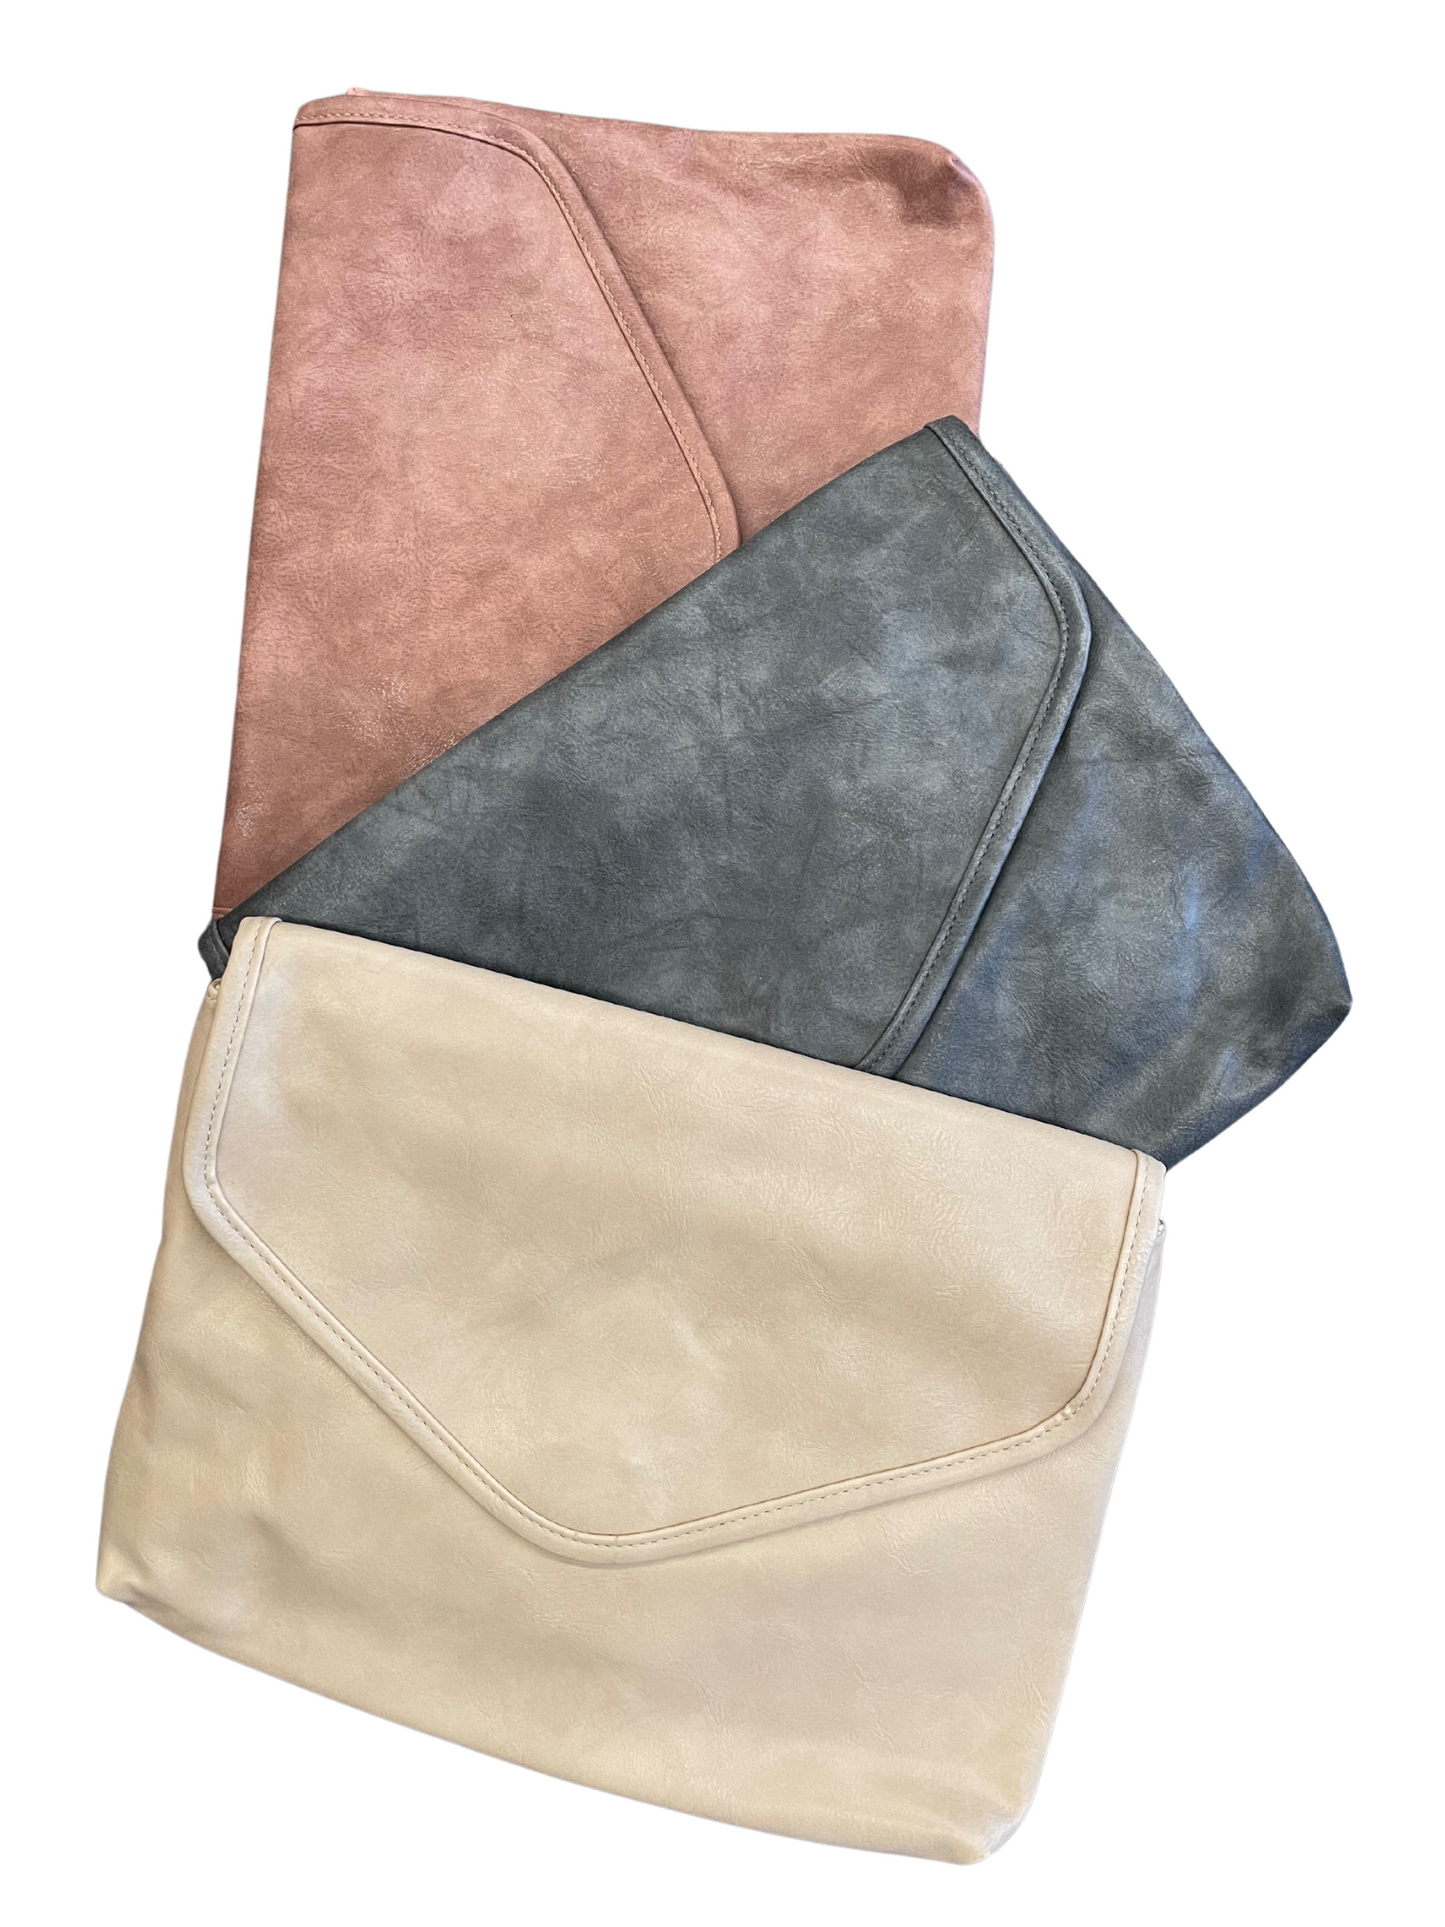 Vegan Leather  Discover an exceptional crossbody bag with hidden features! Boasting a zigzag design interior, 2 pockets, and zippered compartment inside and sporting a snap closure, zipper pocket outside with a customizable strap that can be removed or adjusted to your liking.  Size: 13.5"x10.25"